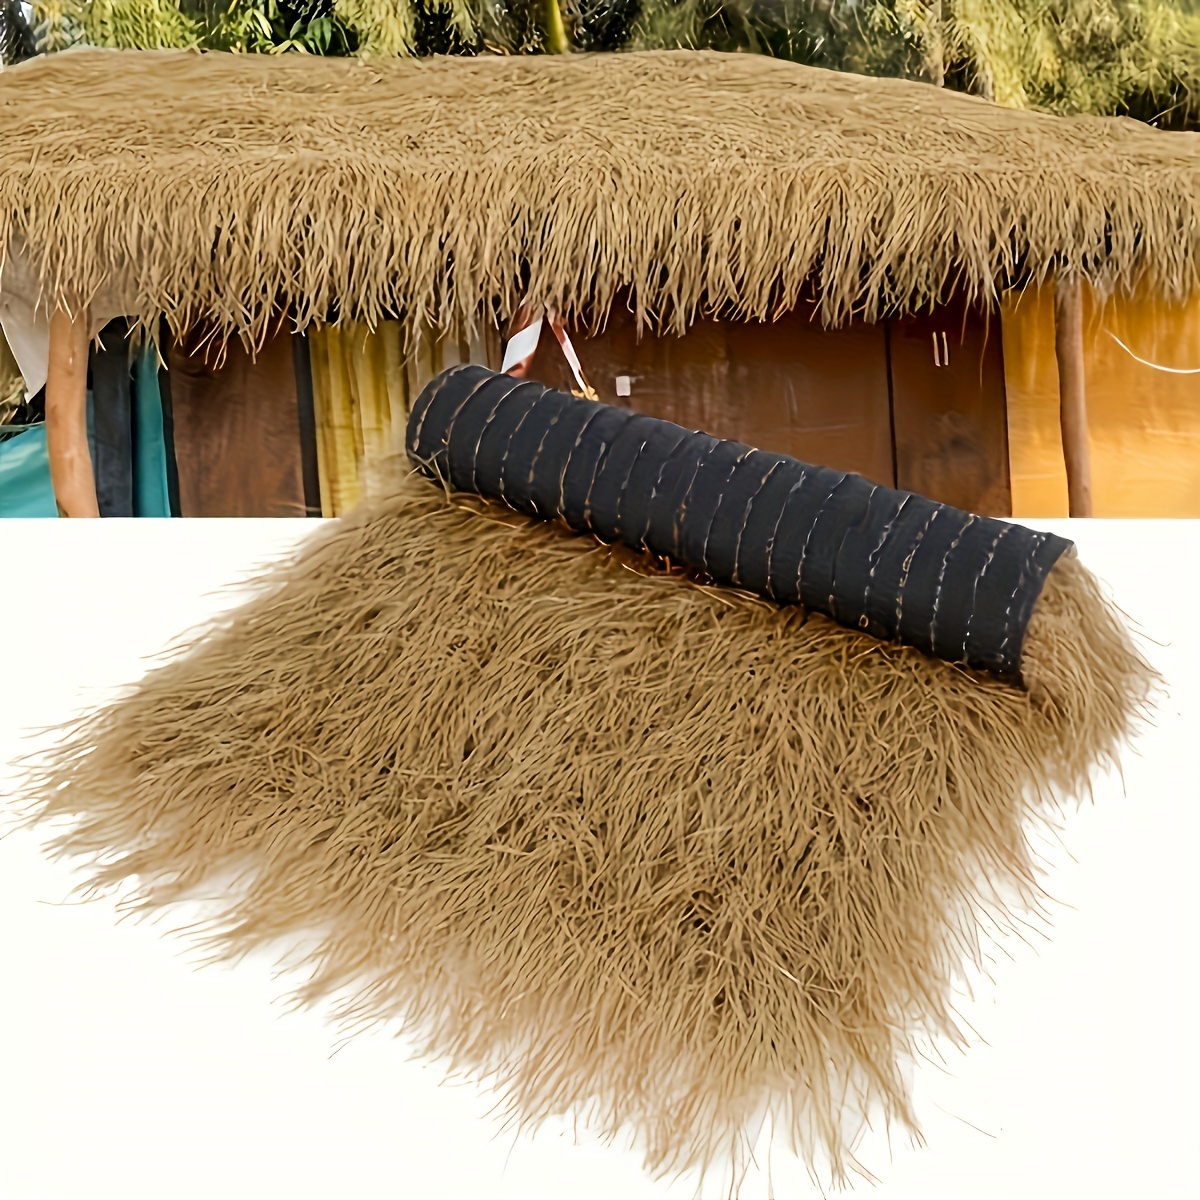 

Artificial Thatch Roof Roll, 50mm Fiber Height, Plastic Synthetic Grass For Bar, Cabana, Gazebo, Outdoor Lawn Roofing - 1pc Simulation Thatch Carpet.